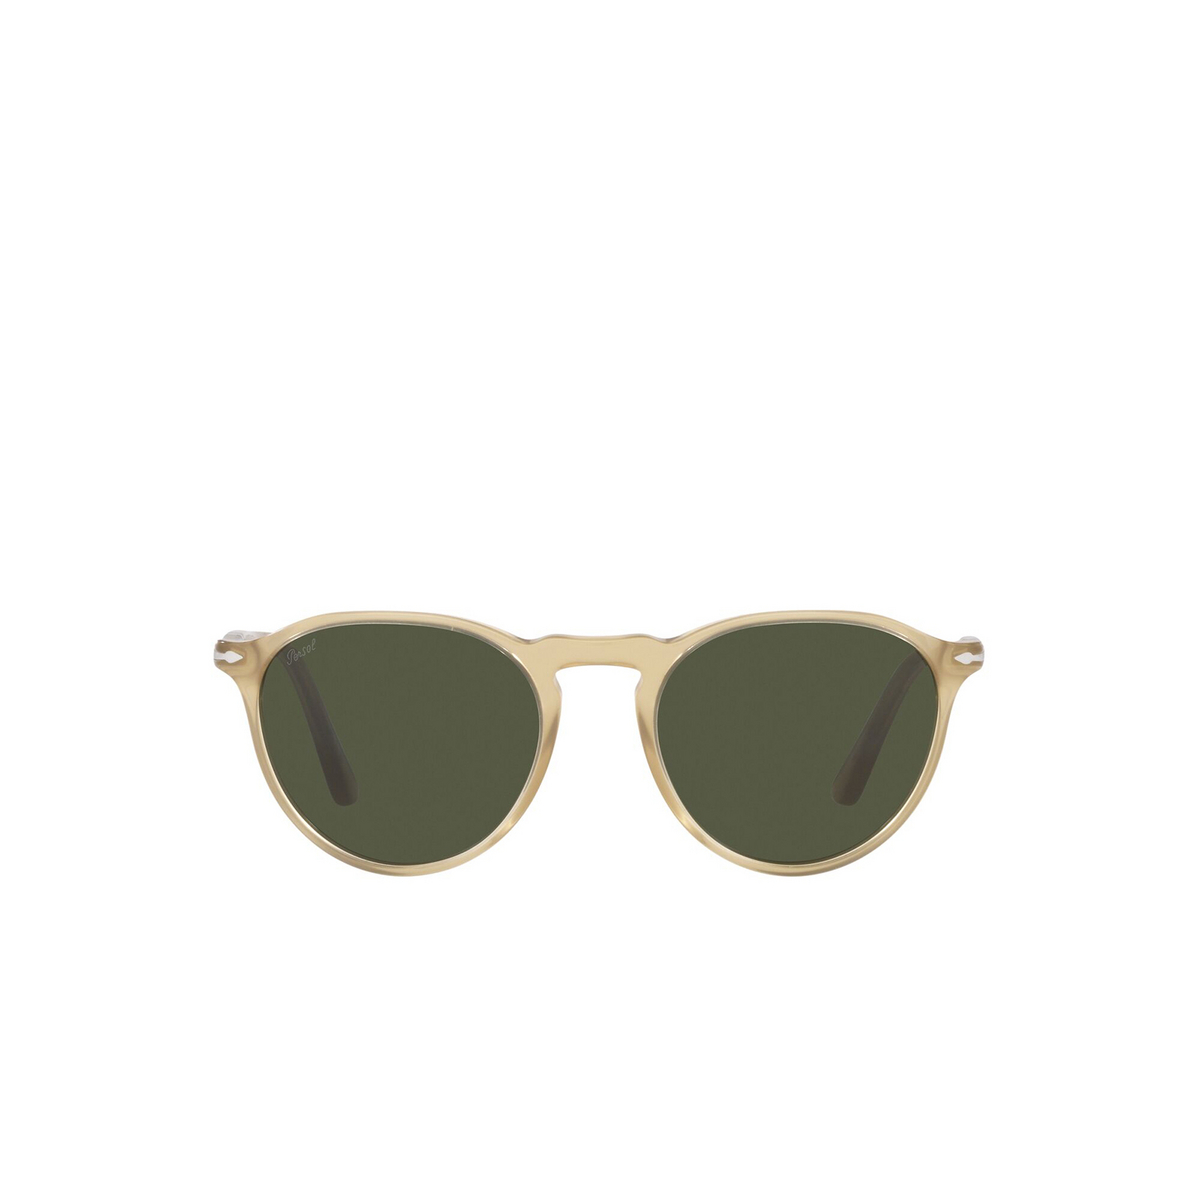 Persol® Round Sunglasses: PO3286S color Beige Opal 116931 - front view.